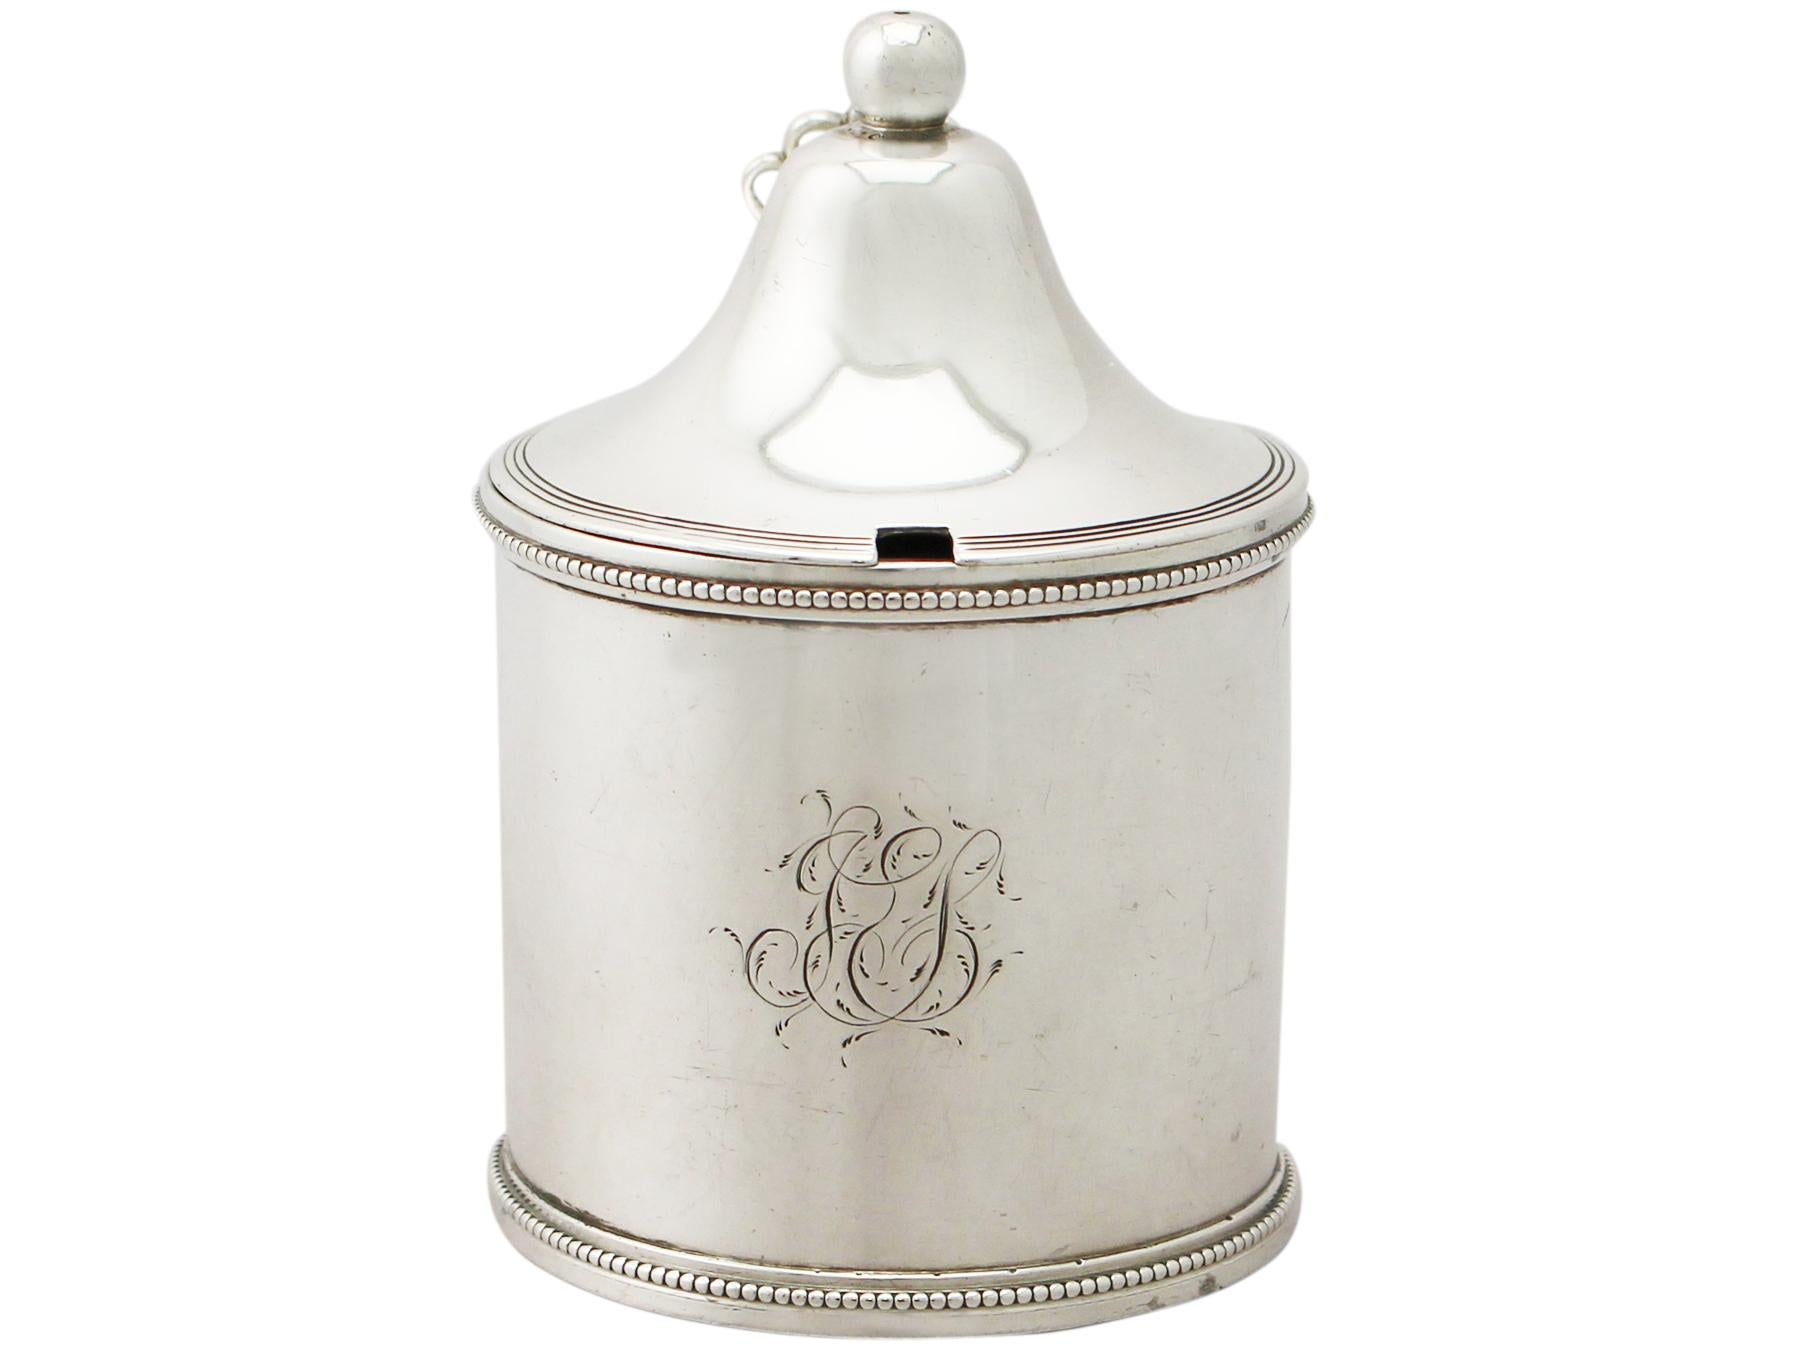 British Antique George III Sterling Silver Mustard Pot by Peter and Ann Bateman